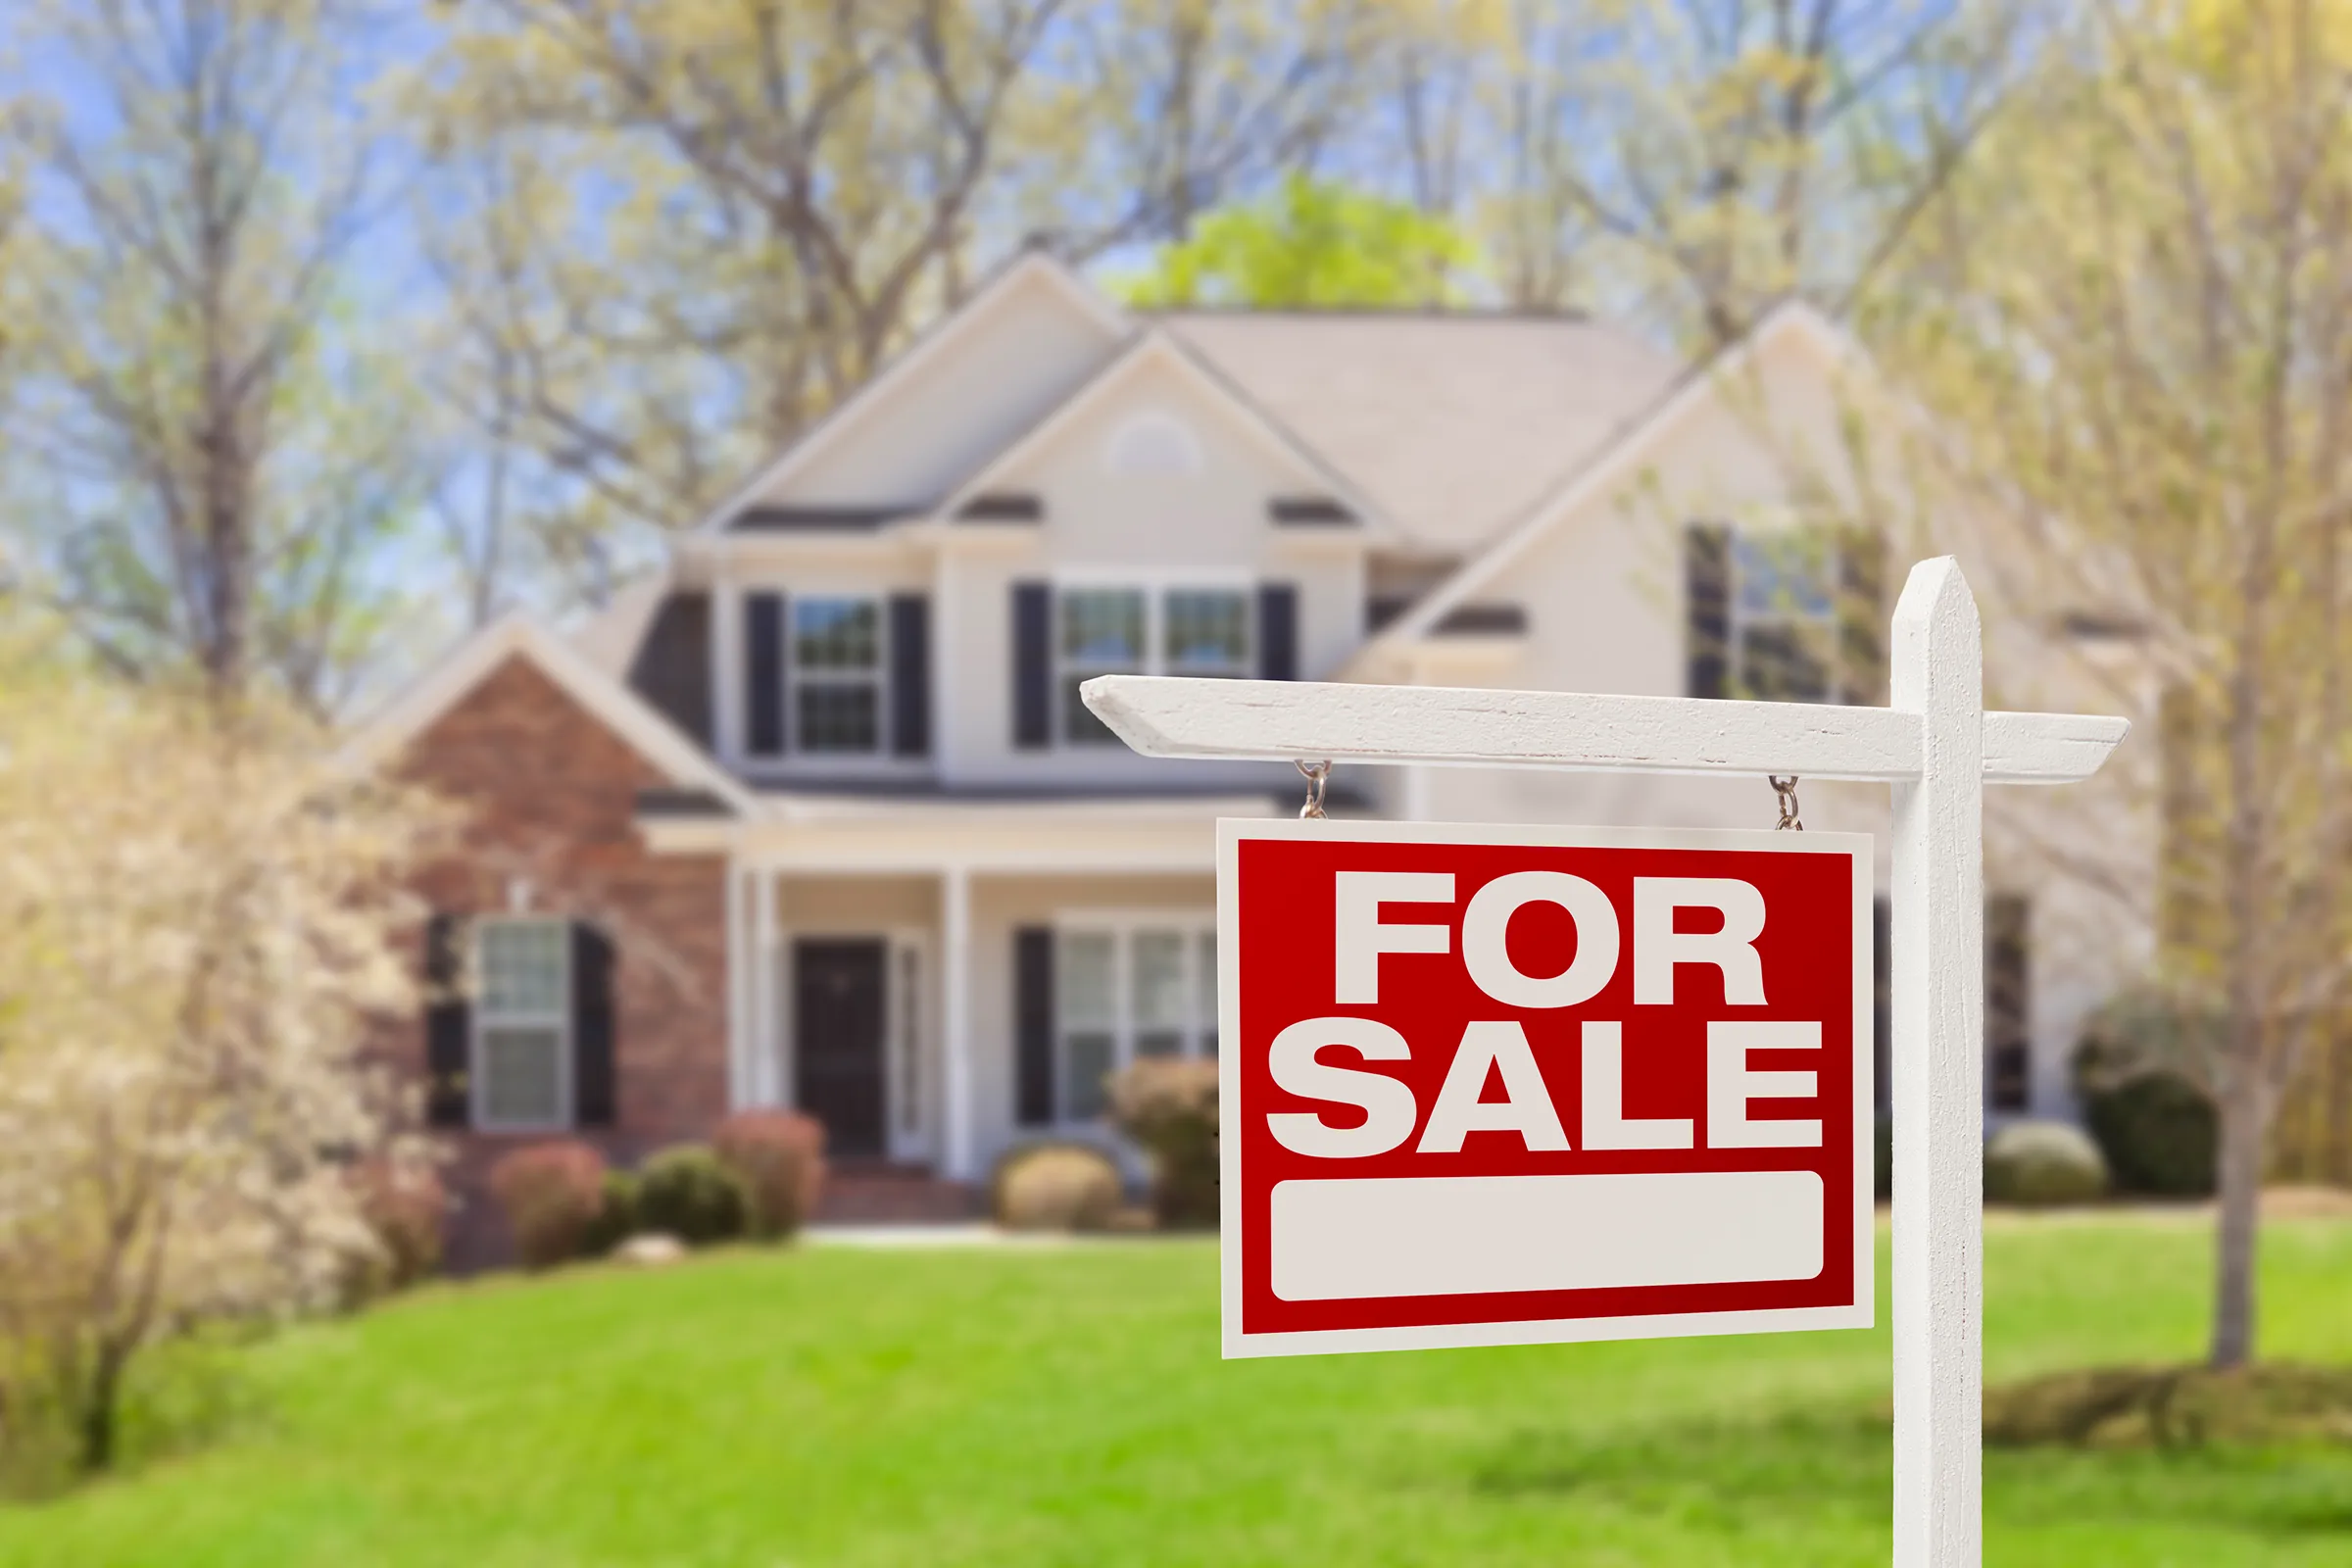 Selling House | Real Estate Market